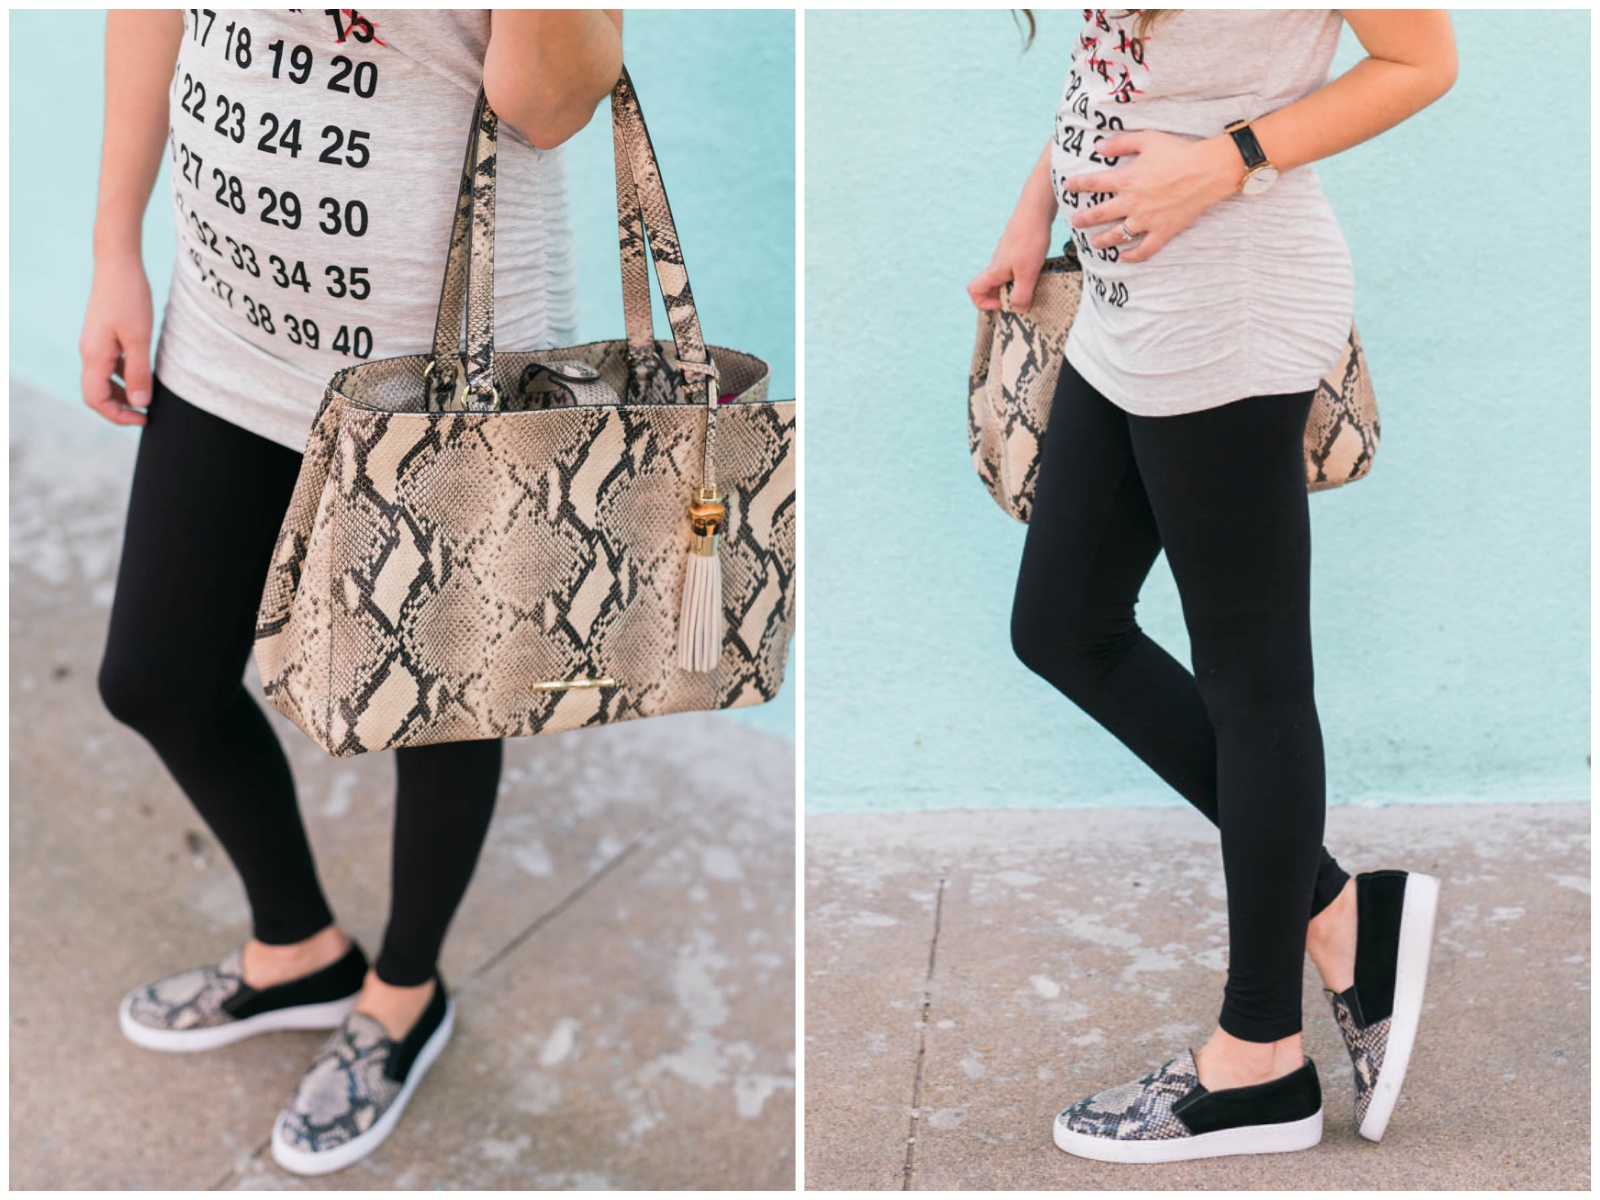 maternity weekly countdown tee, pregnancy countdown top, pea in the pod leggings, what to wear with maternity leggings, vionic snake sneakers, elaine turner snake printed tote purse